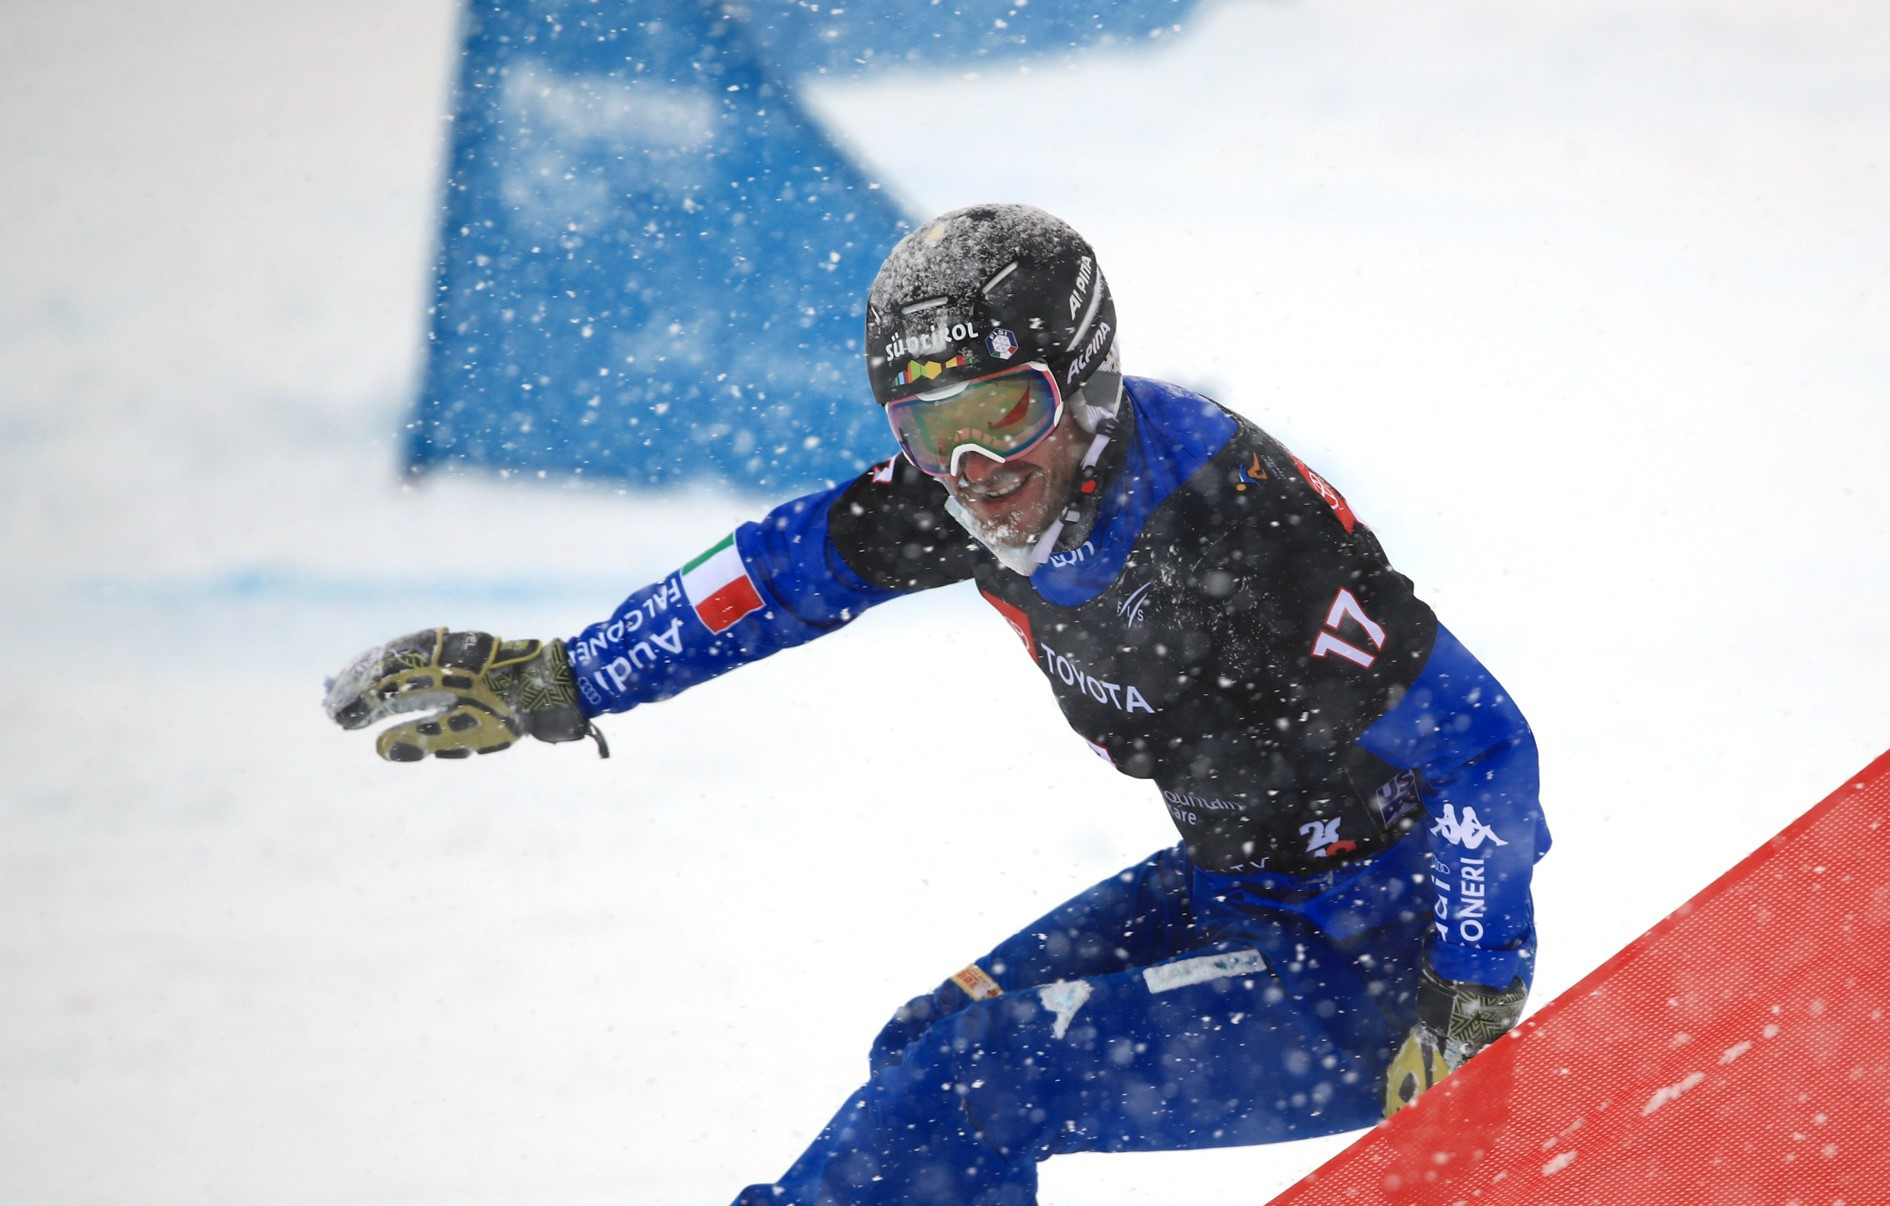 Nadyrshina and March win first parallel slalom races of Snowboard World Cup season